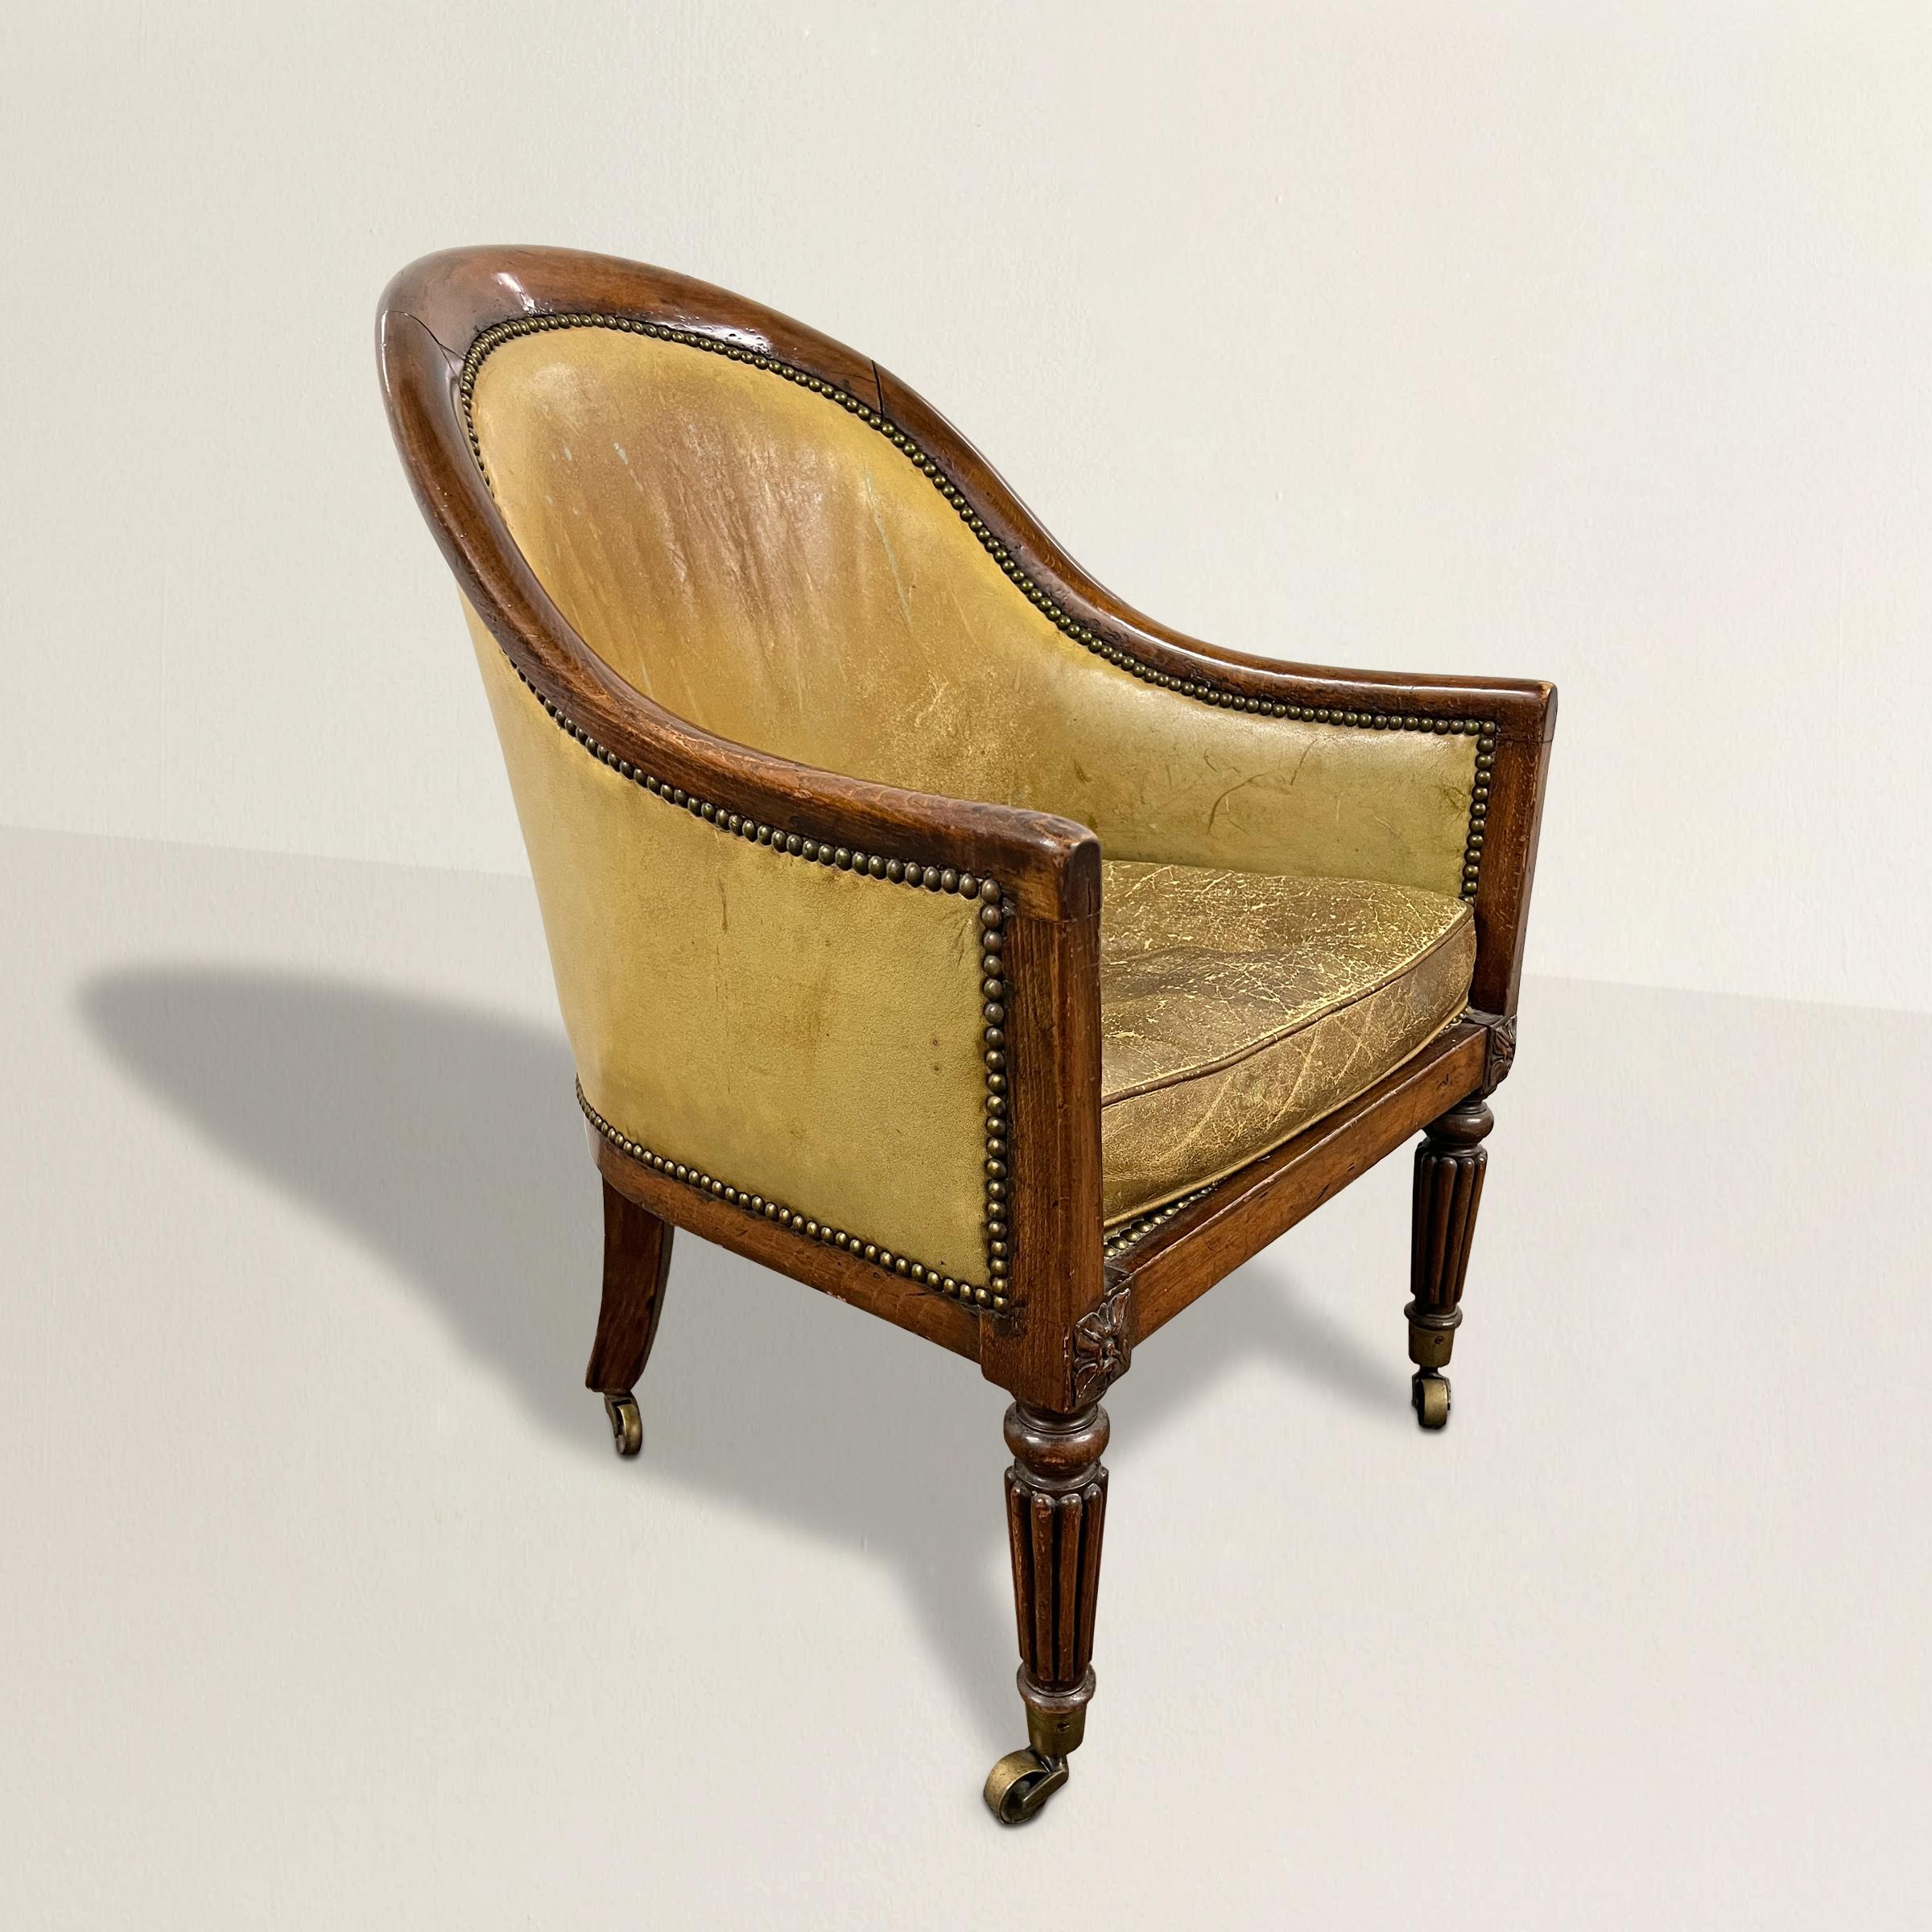 An inviting and enveloping early 19th century Early Victorian round back armchair with a wonderfully curved wooden frame, leather upholstery with a tight back and loose seat cushion, and standing on tapered fluted legs with brass casters. The